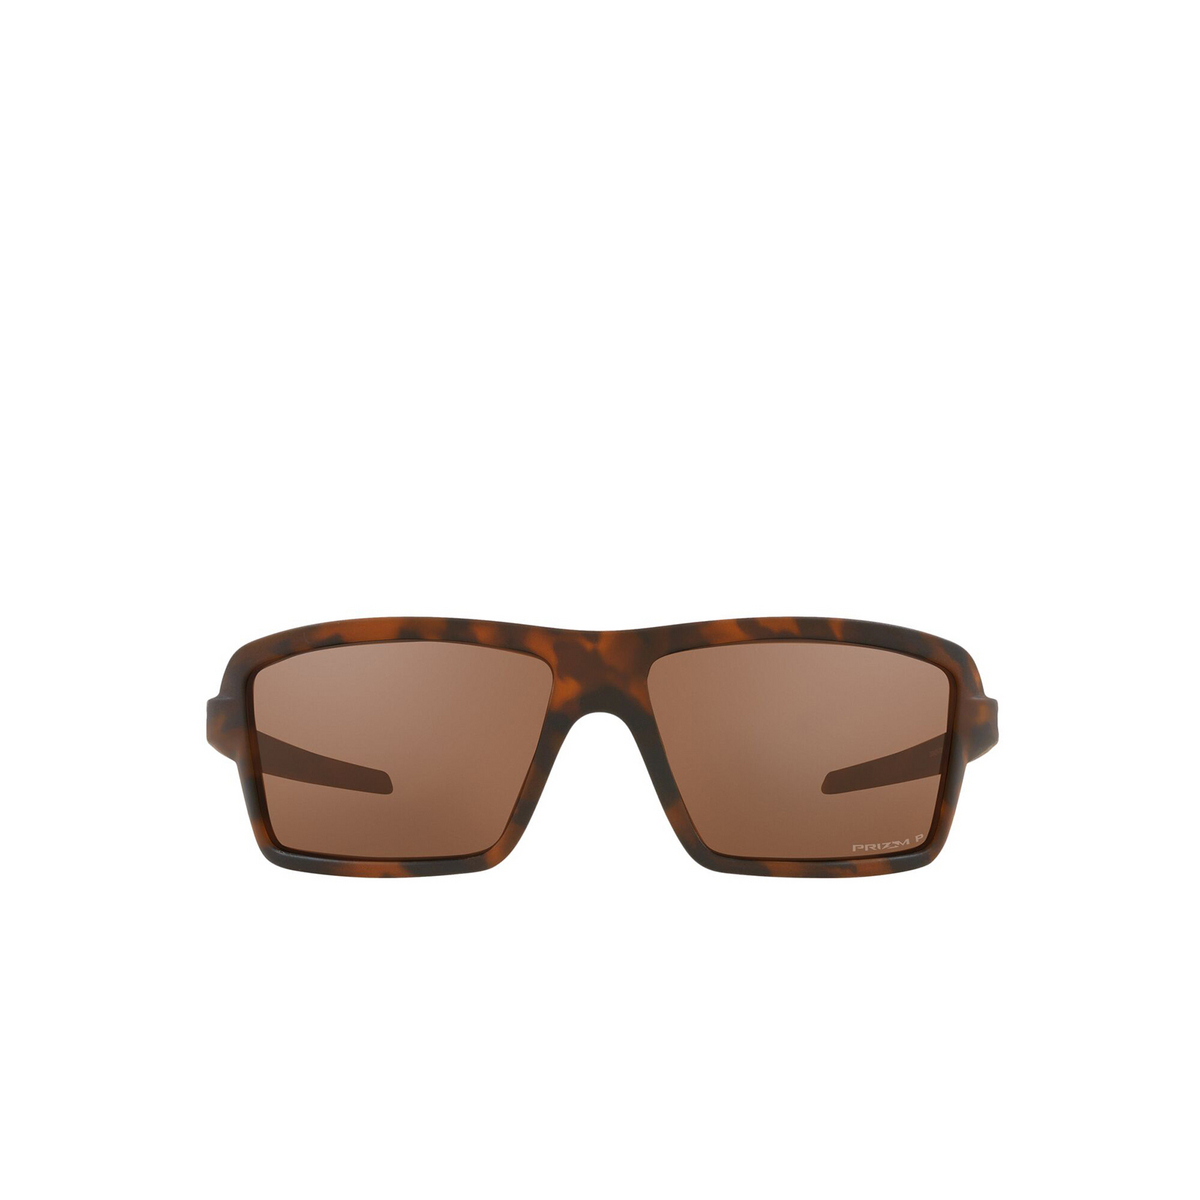 Oakley CABLES Sunglasses 912907 Brown Tortoise - front view